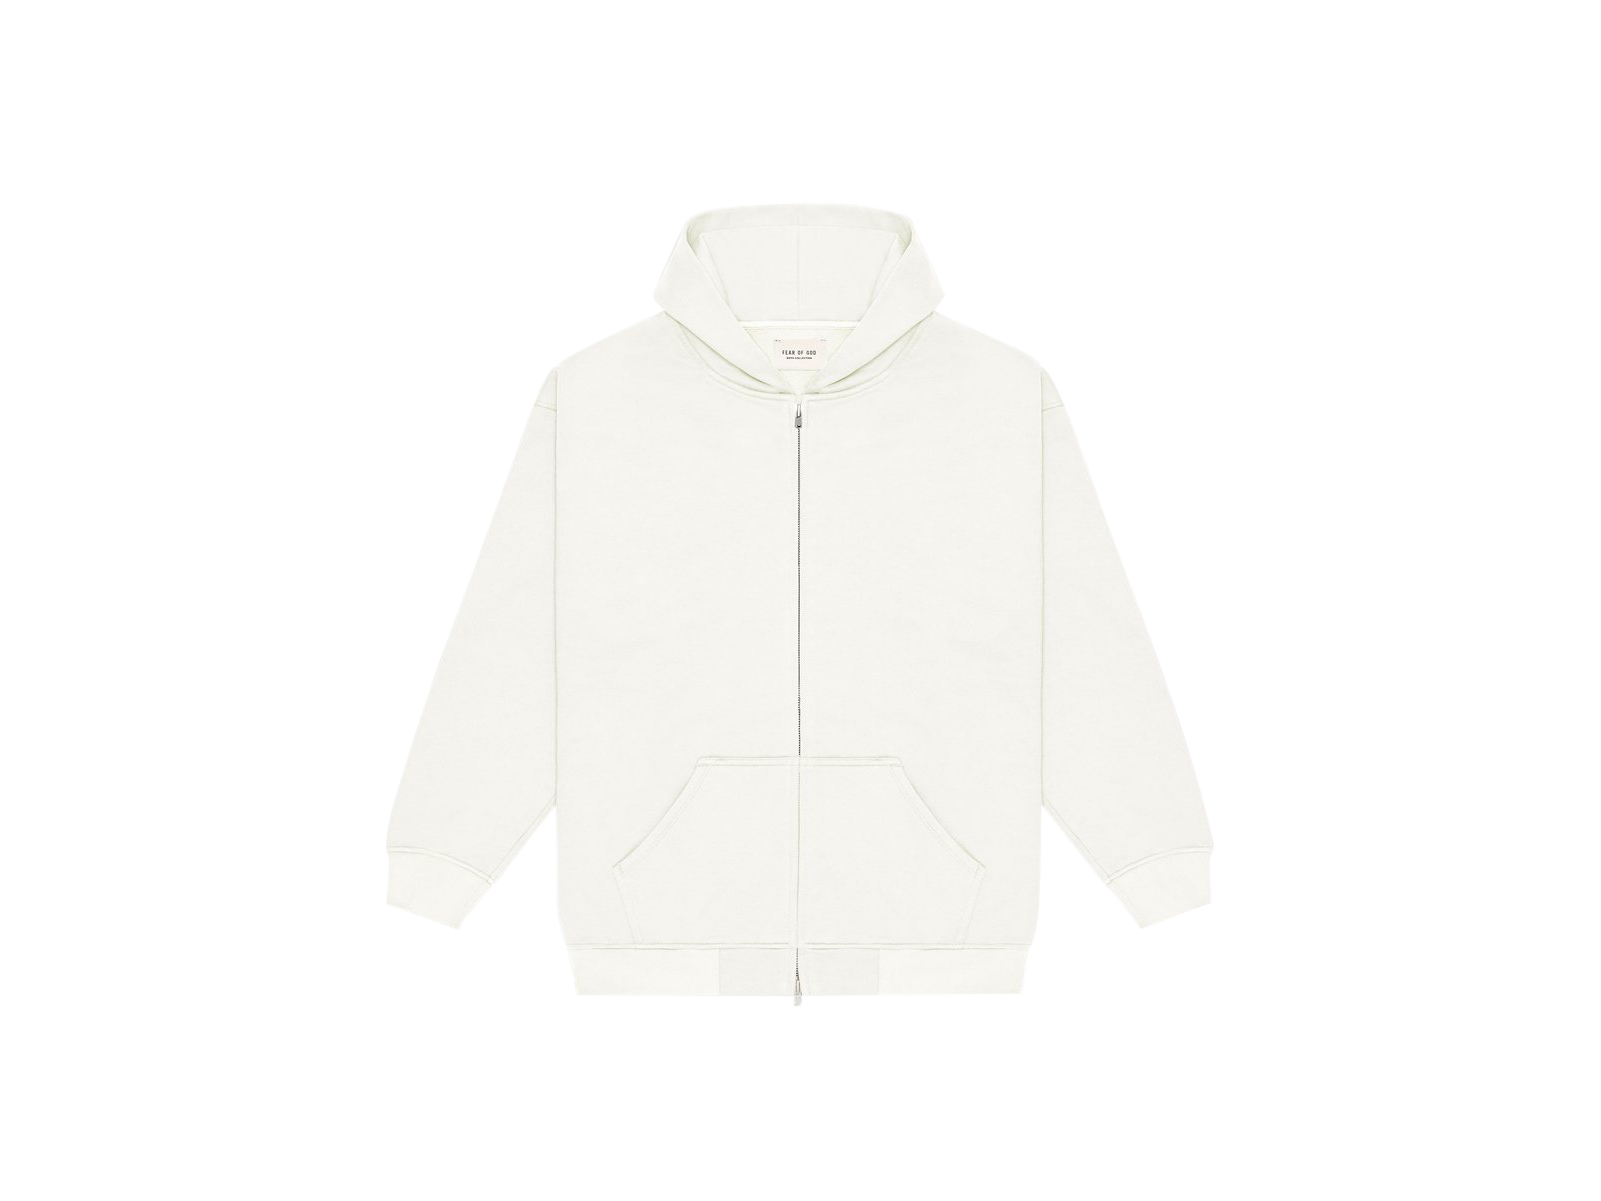 FEAR OF GOD Everyday Full Zip Hoodie White - SIXTH COLLECTION - GB